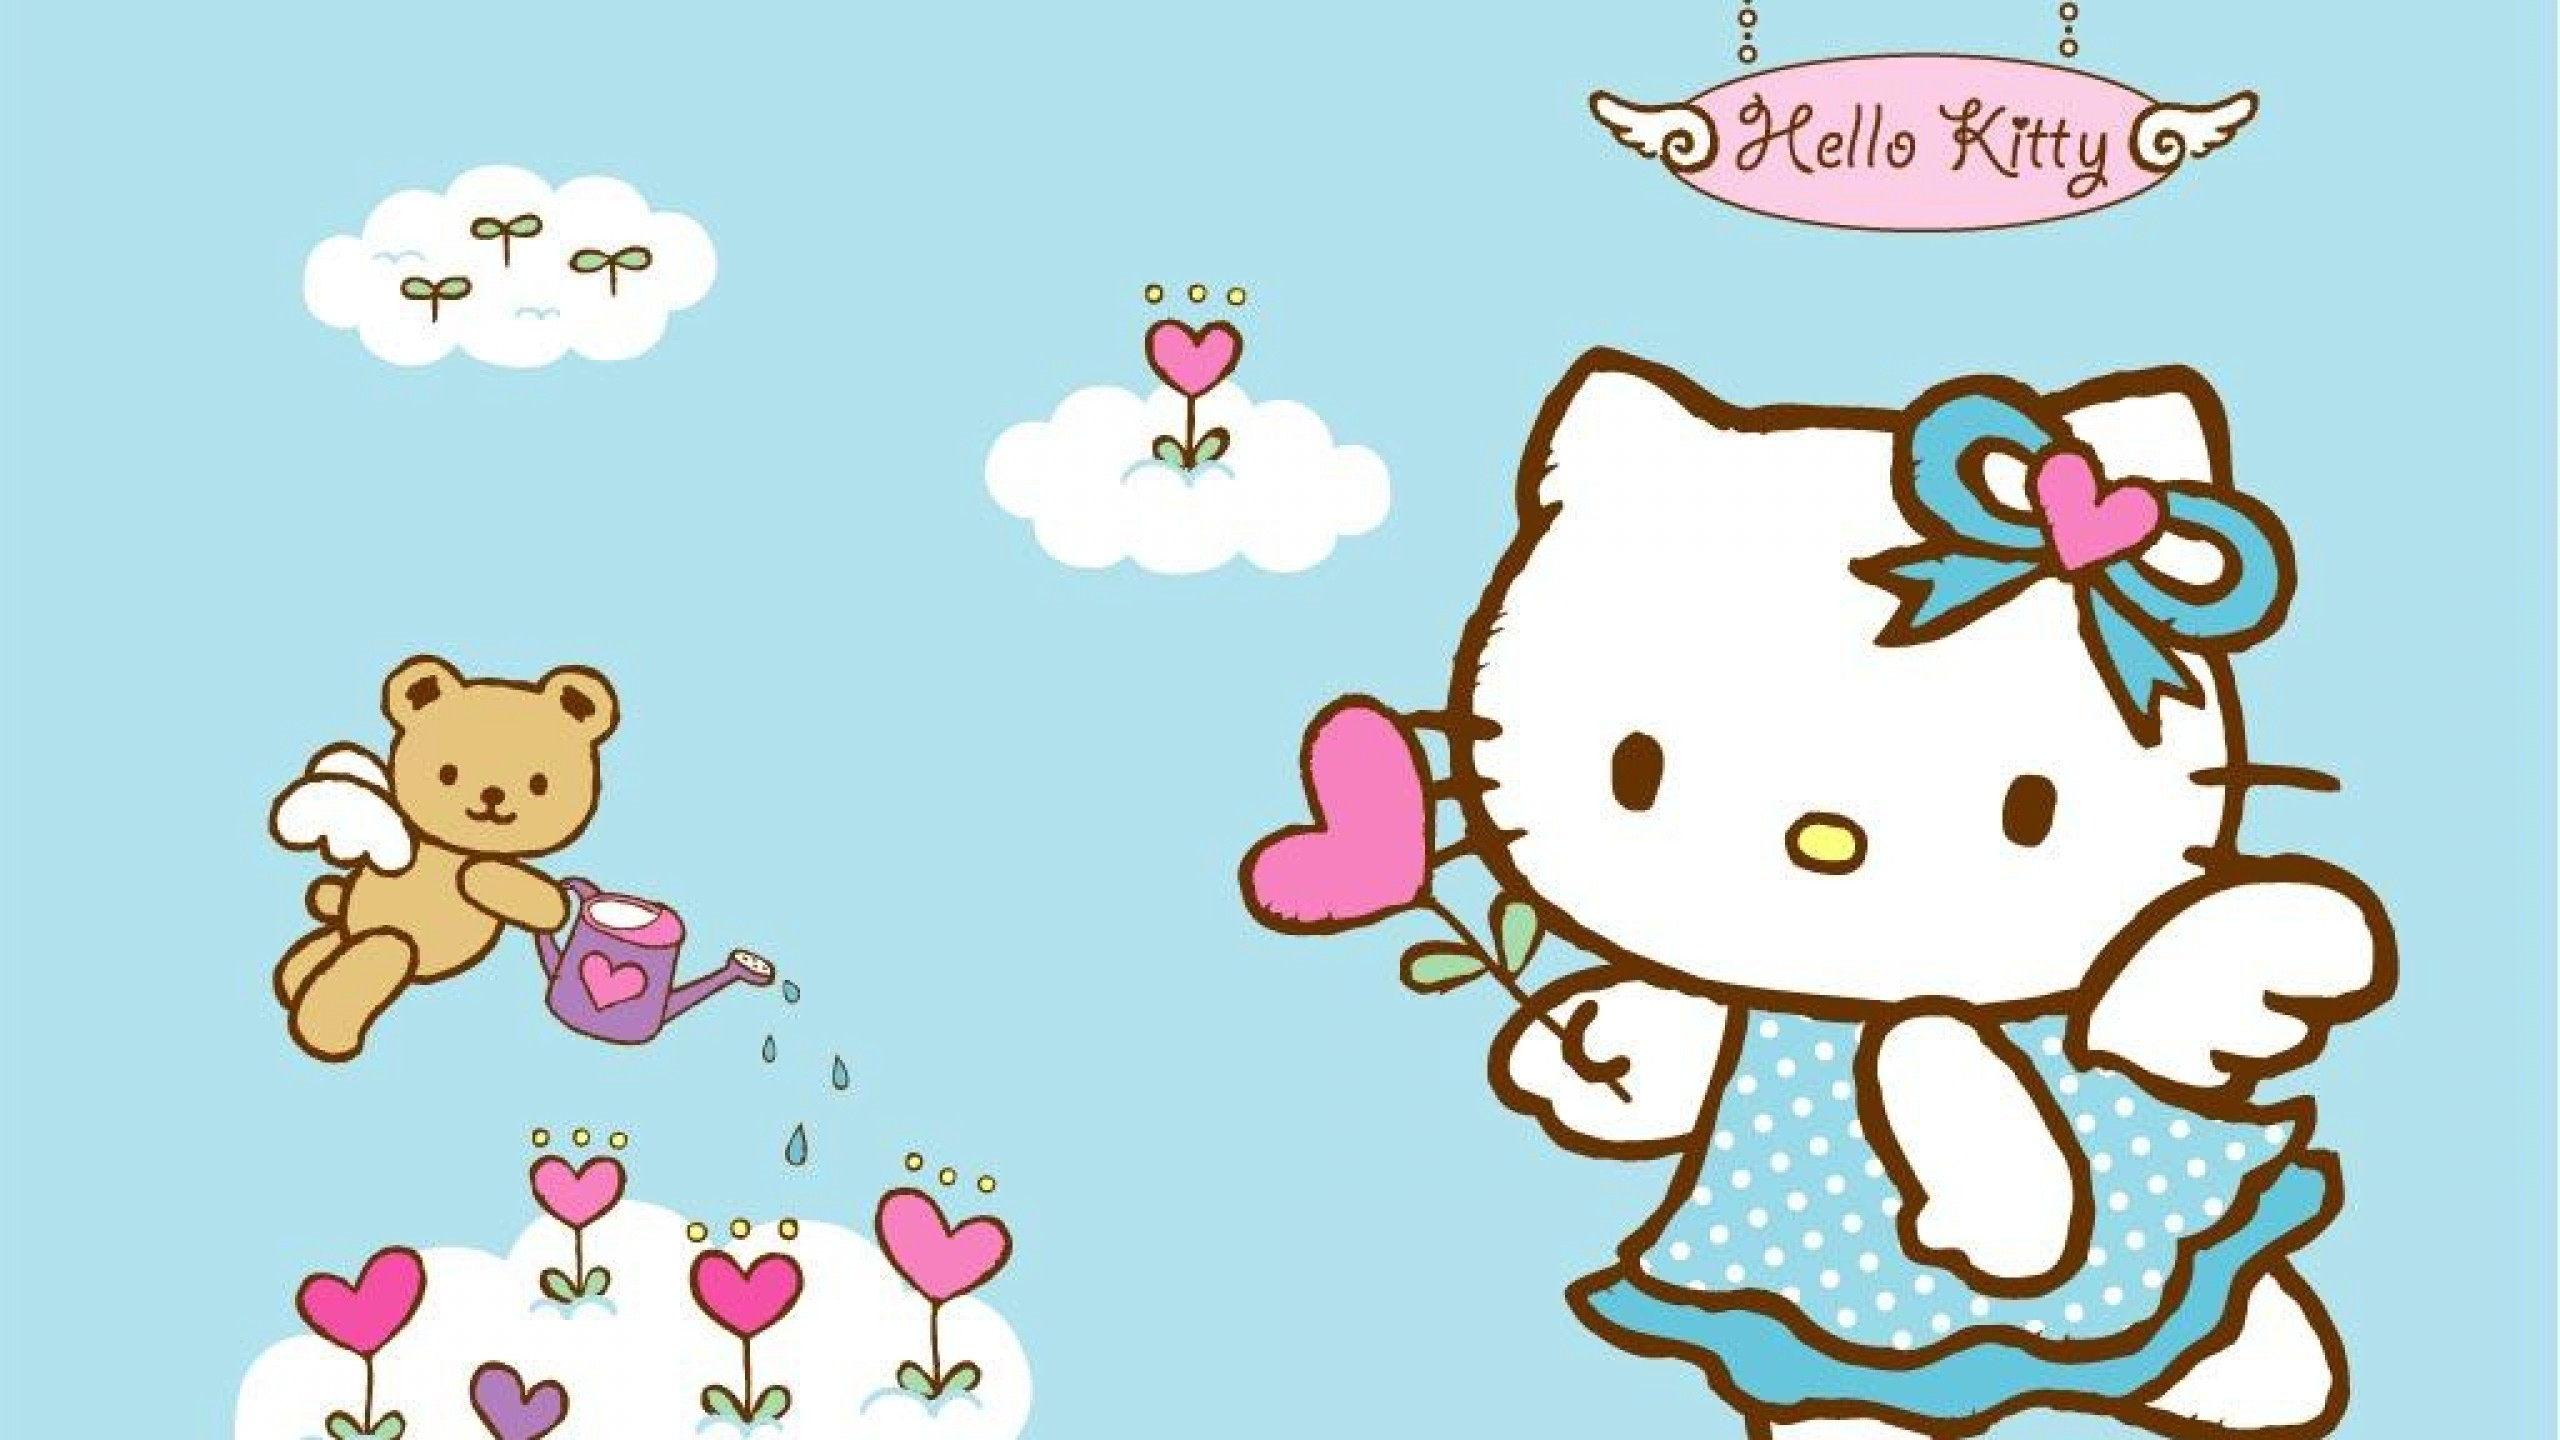 Hello Kitty Wallpapers  Top 35 Best Hello Kitty Wallpapers Download